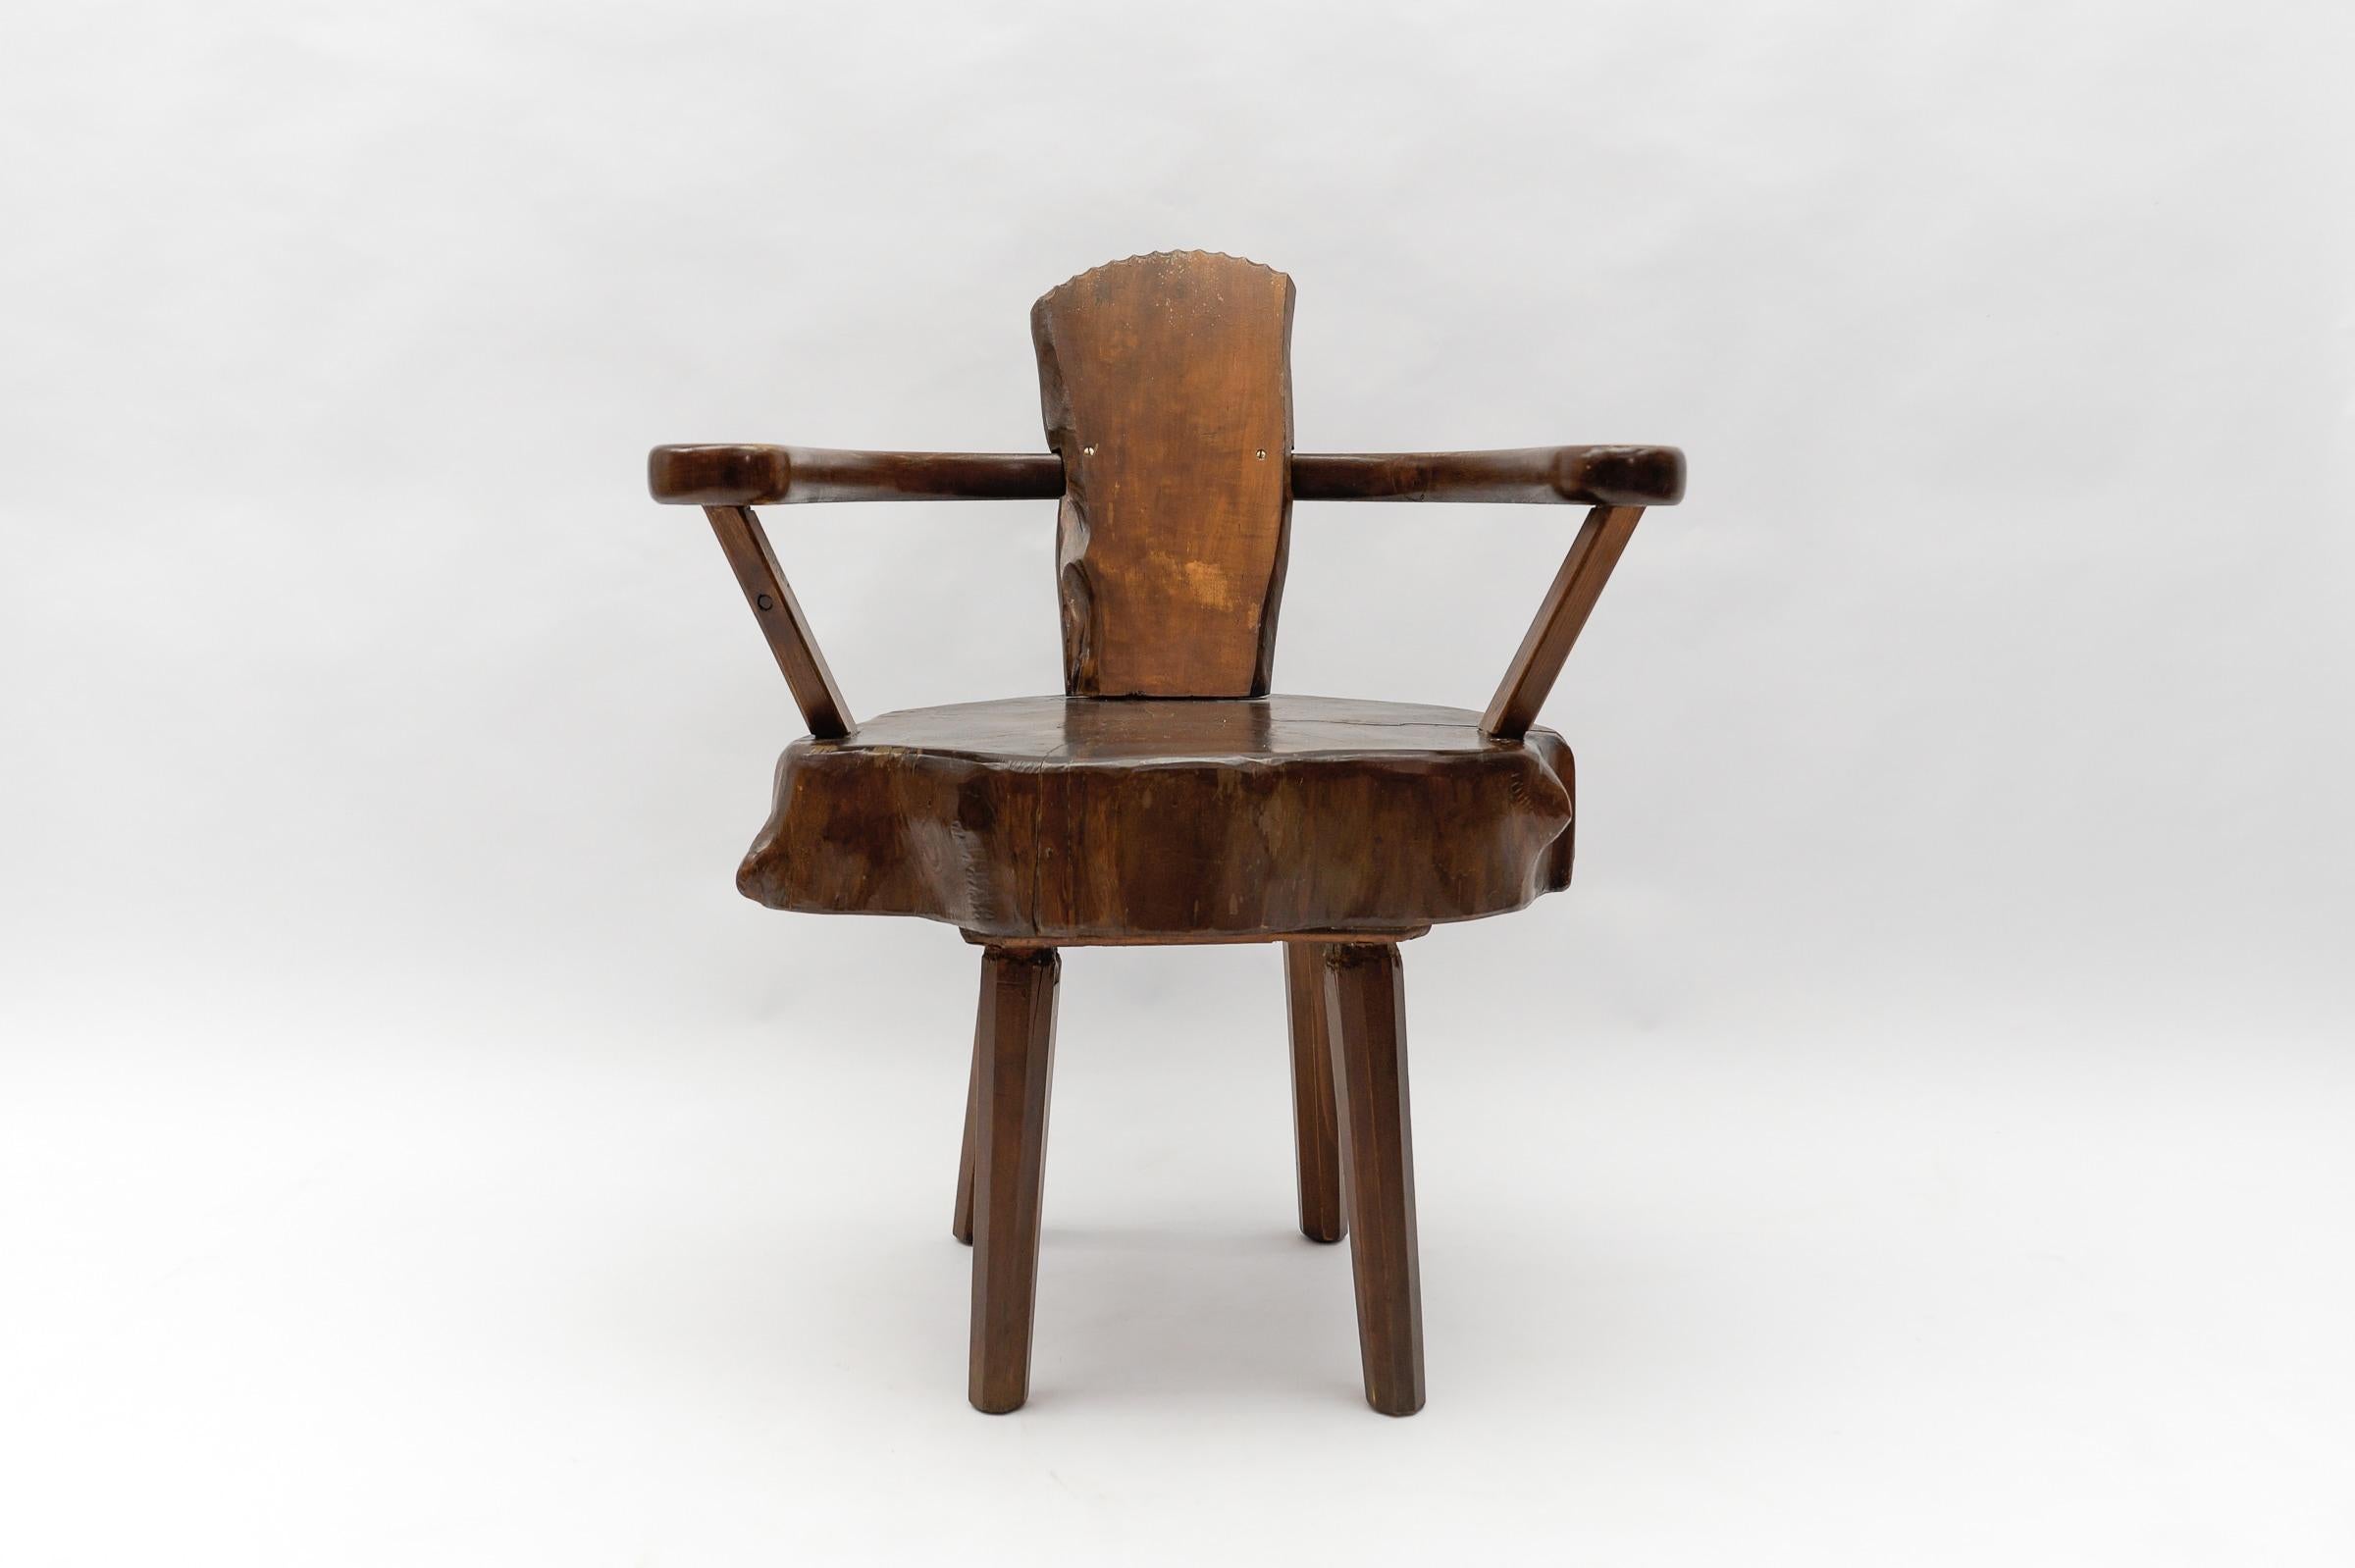 A total of four are available and are offered for sale here on the platform. 

Dark stained. Cool optic. Handmade imposing wooden armchair. Each armchair is unique.

This armchair here has a seat height of 46.5cm. The tree trunk thickness is